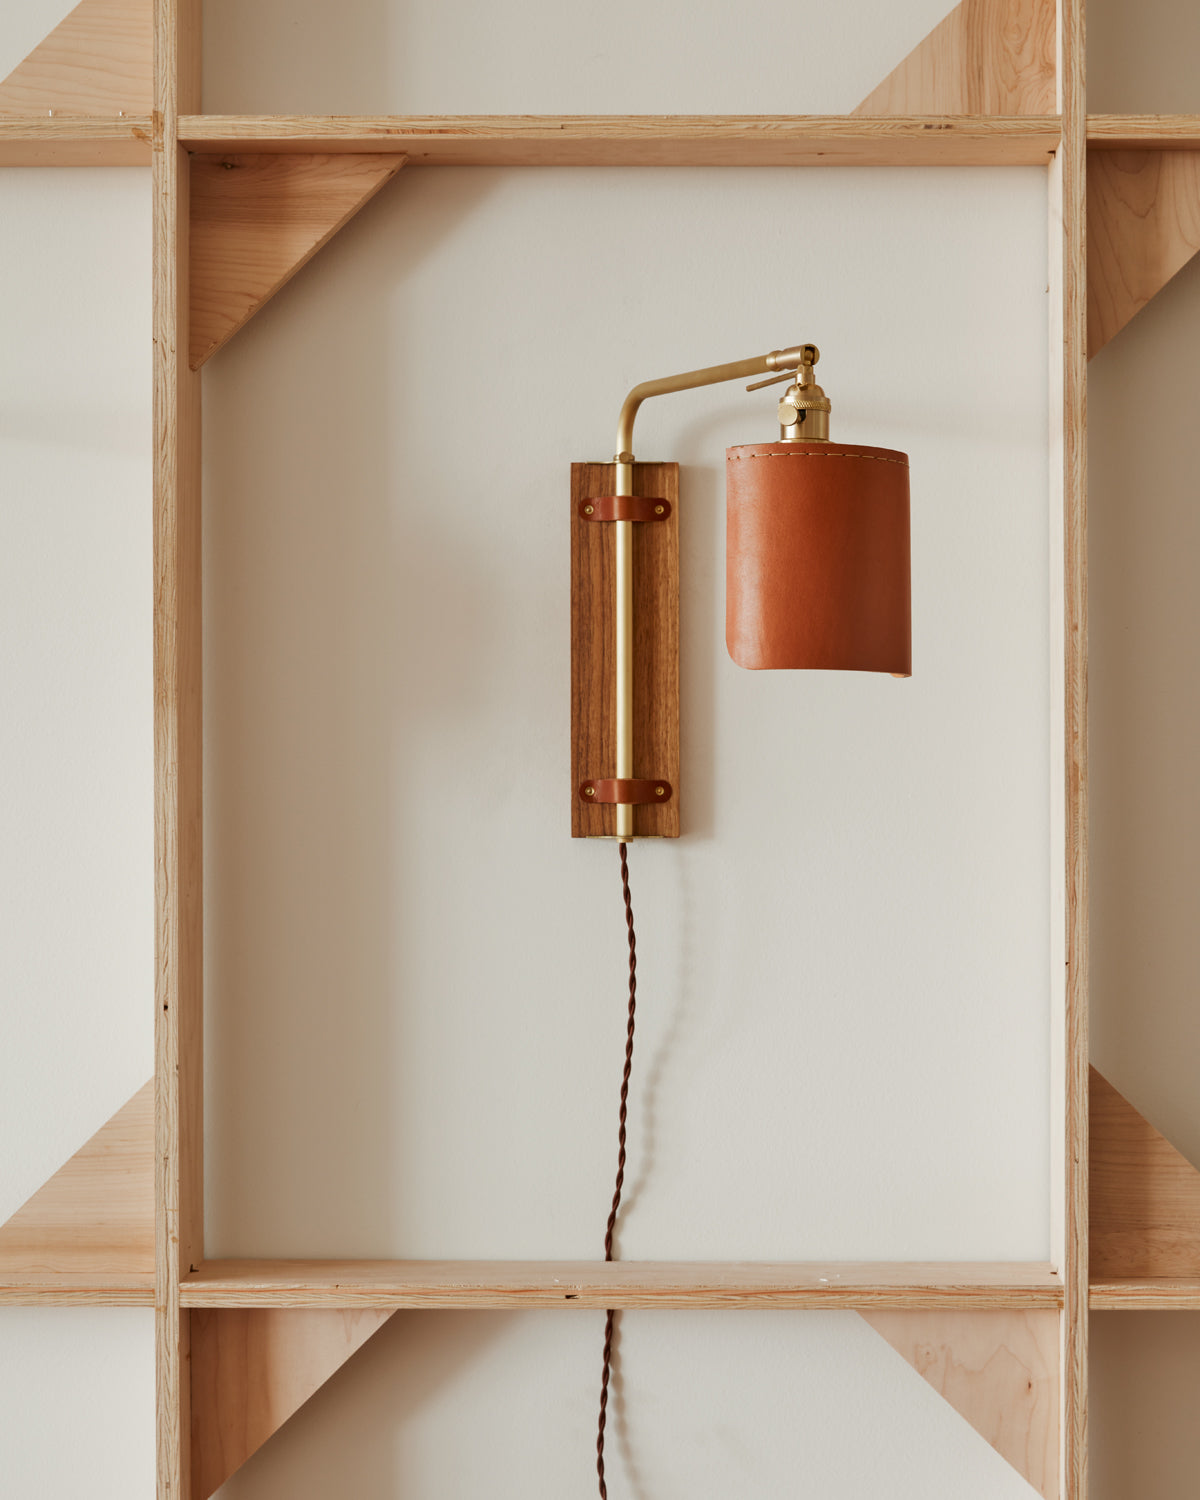 Sophisticated walnut, brass and leather plug in wall sconce with articulating arm and shade